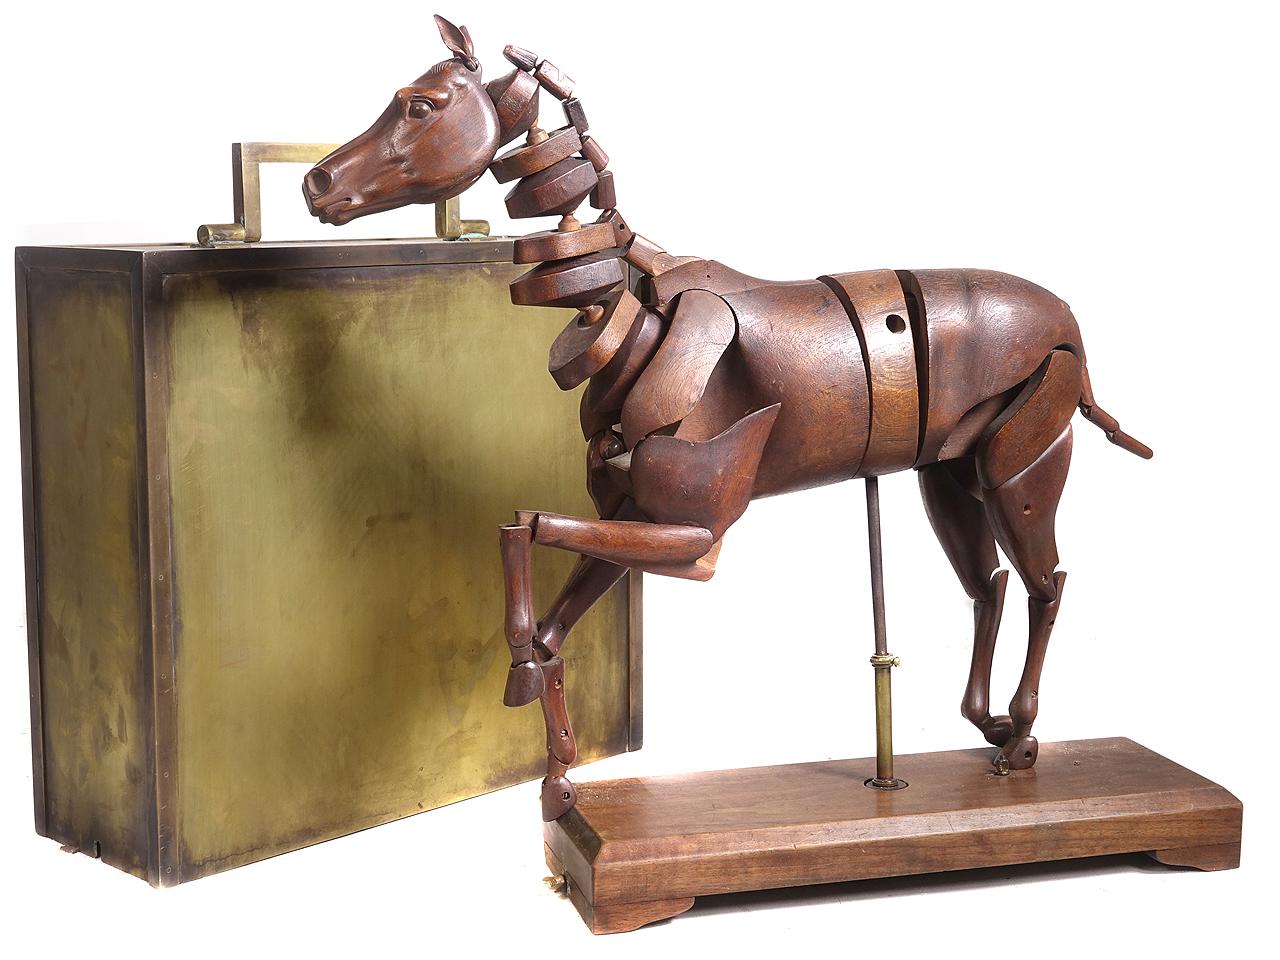 Carved 1830 Articulated Artist's Horse Model and Case